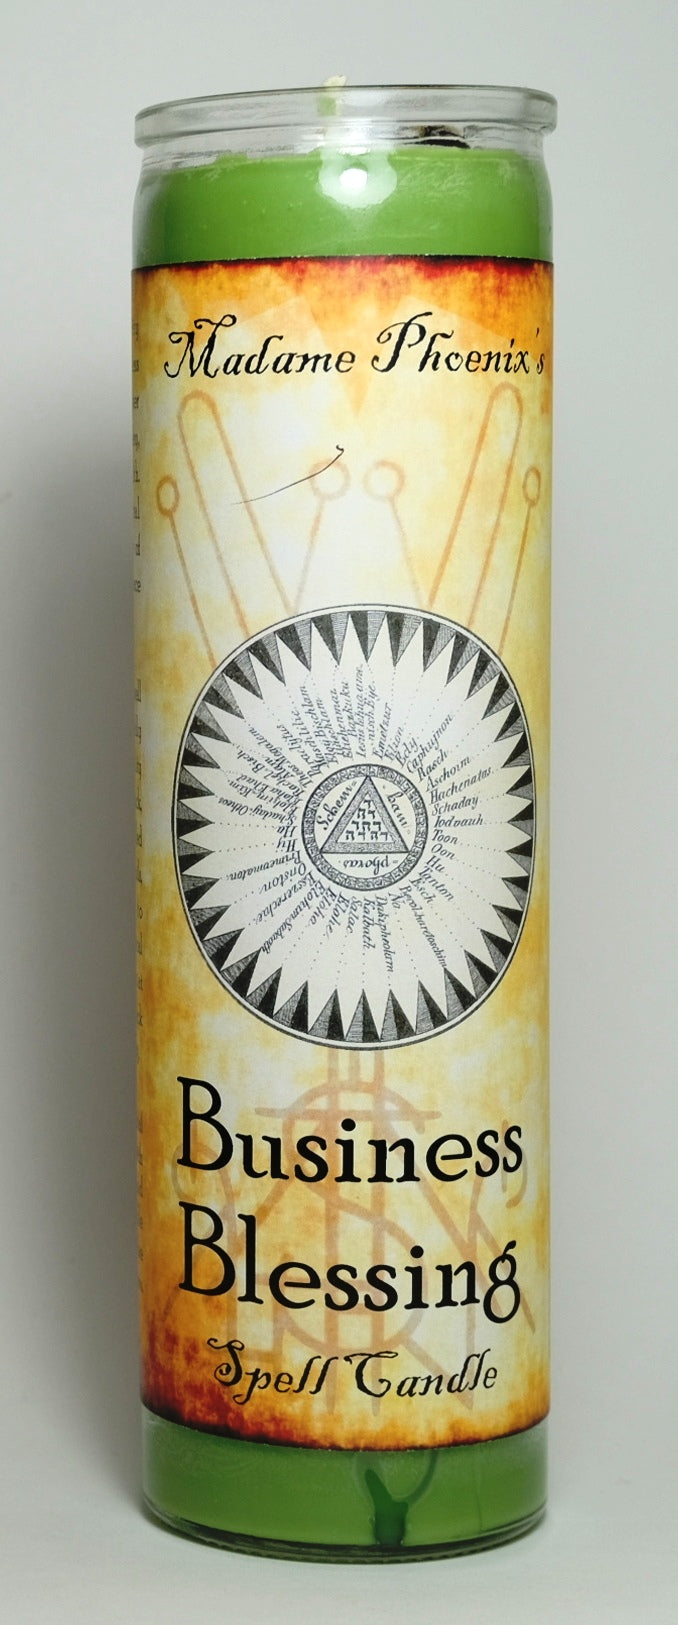 Madame Phoenix - BUSINESS BLESSING Spell Candle 7 Day